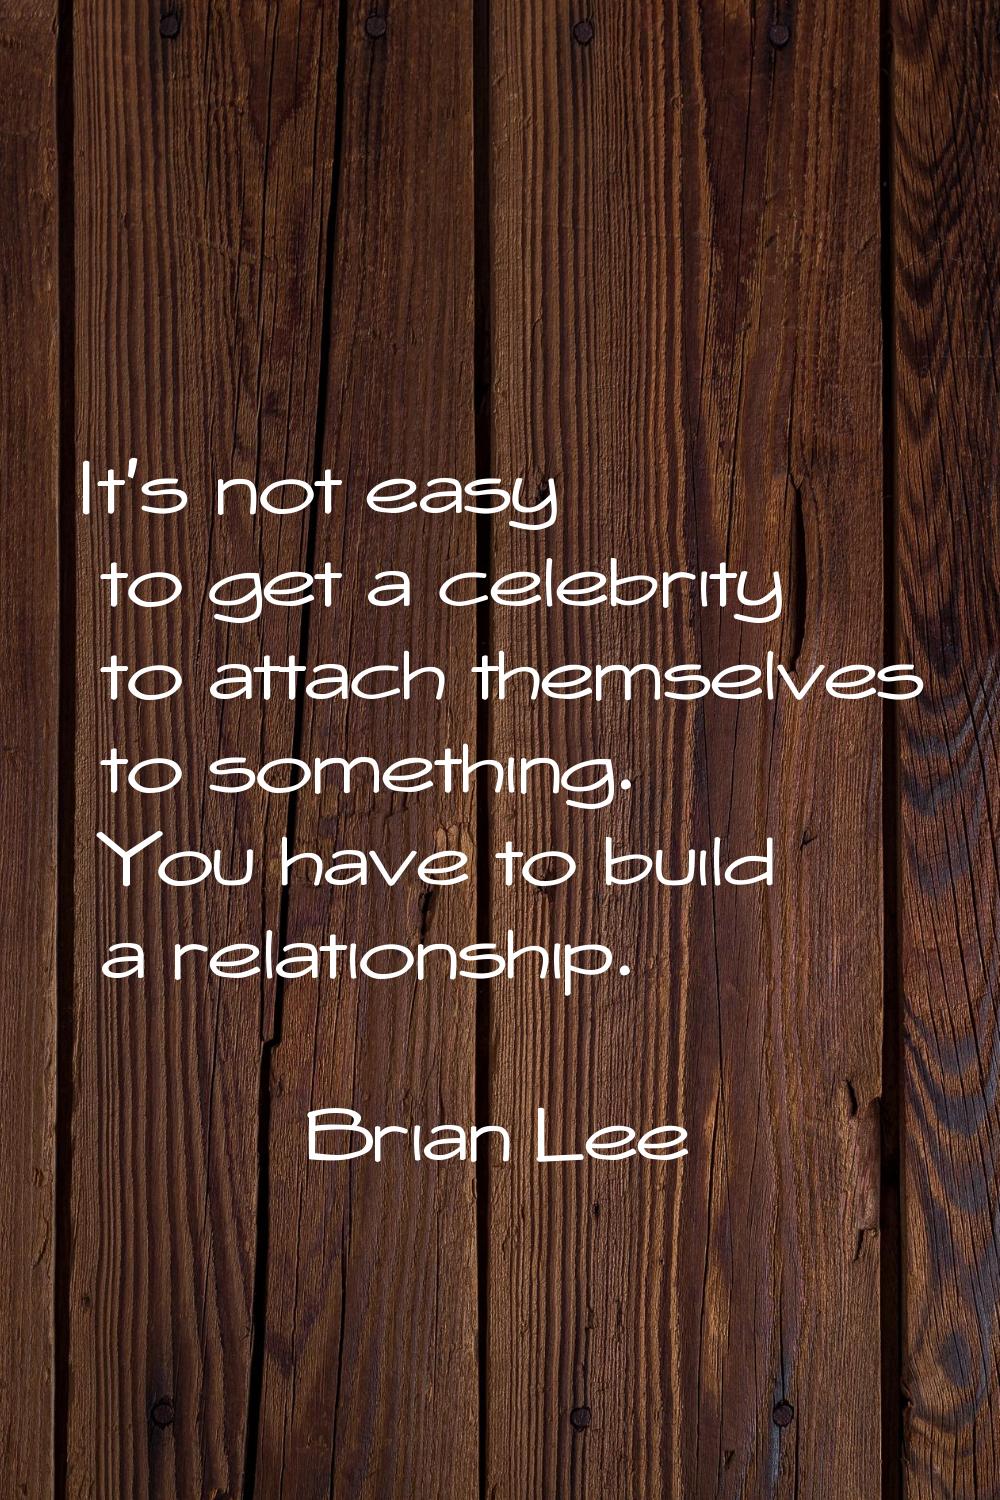 It's not easy to get a celebrity to attach themselves to something. You have to build a relationshi